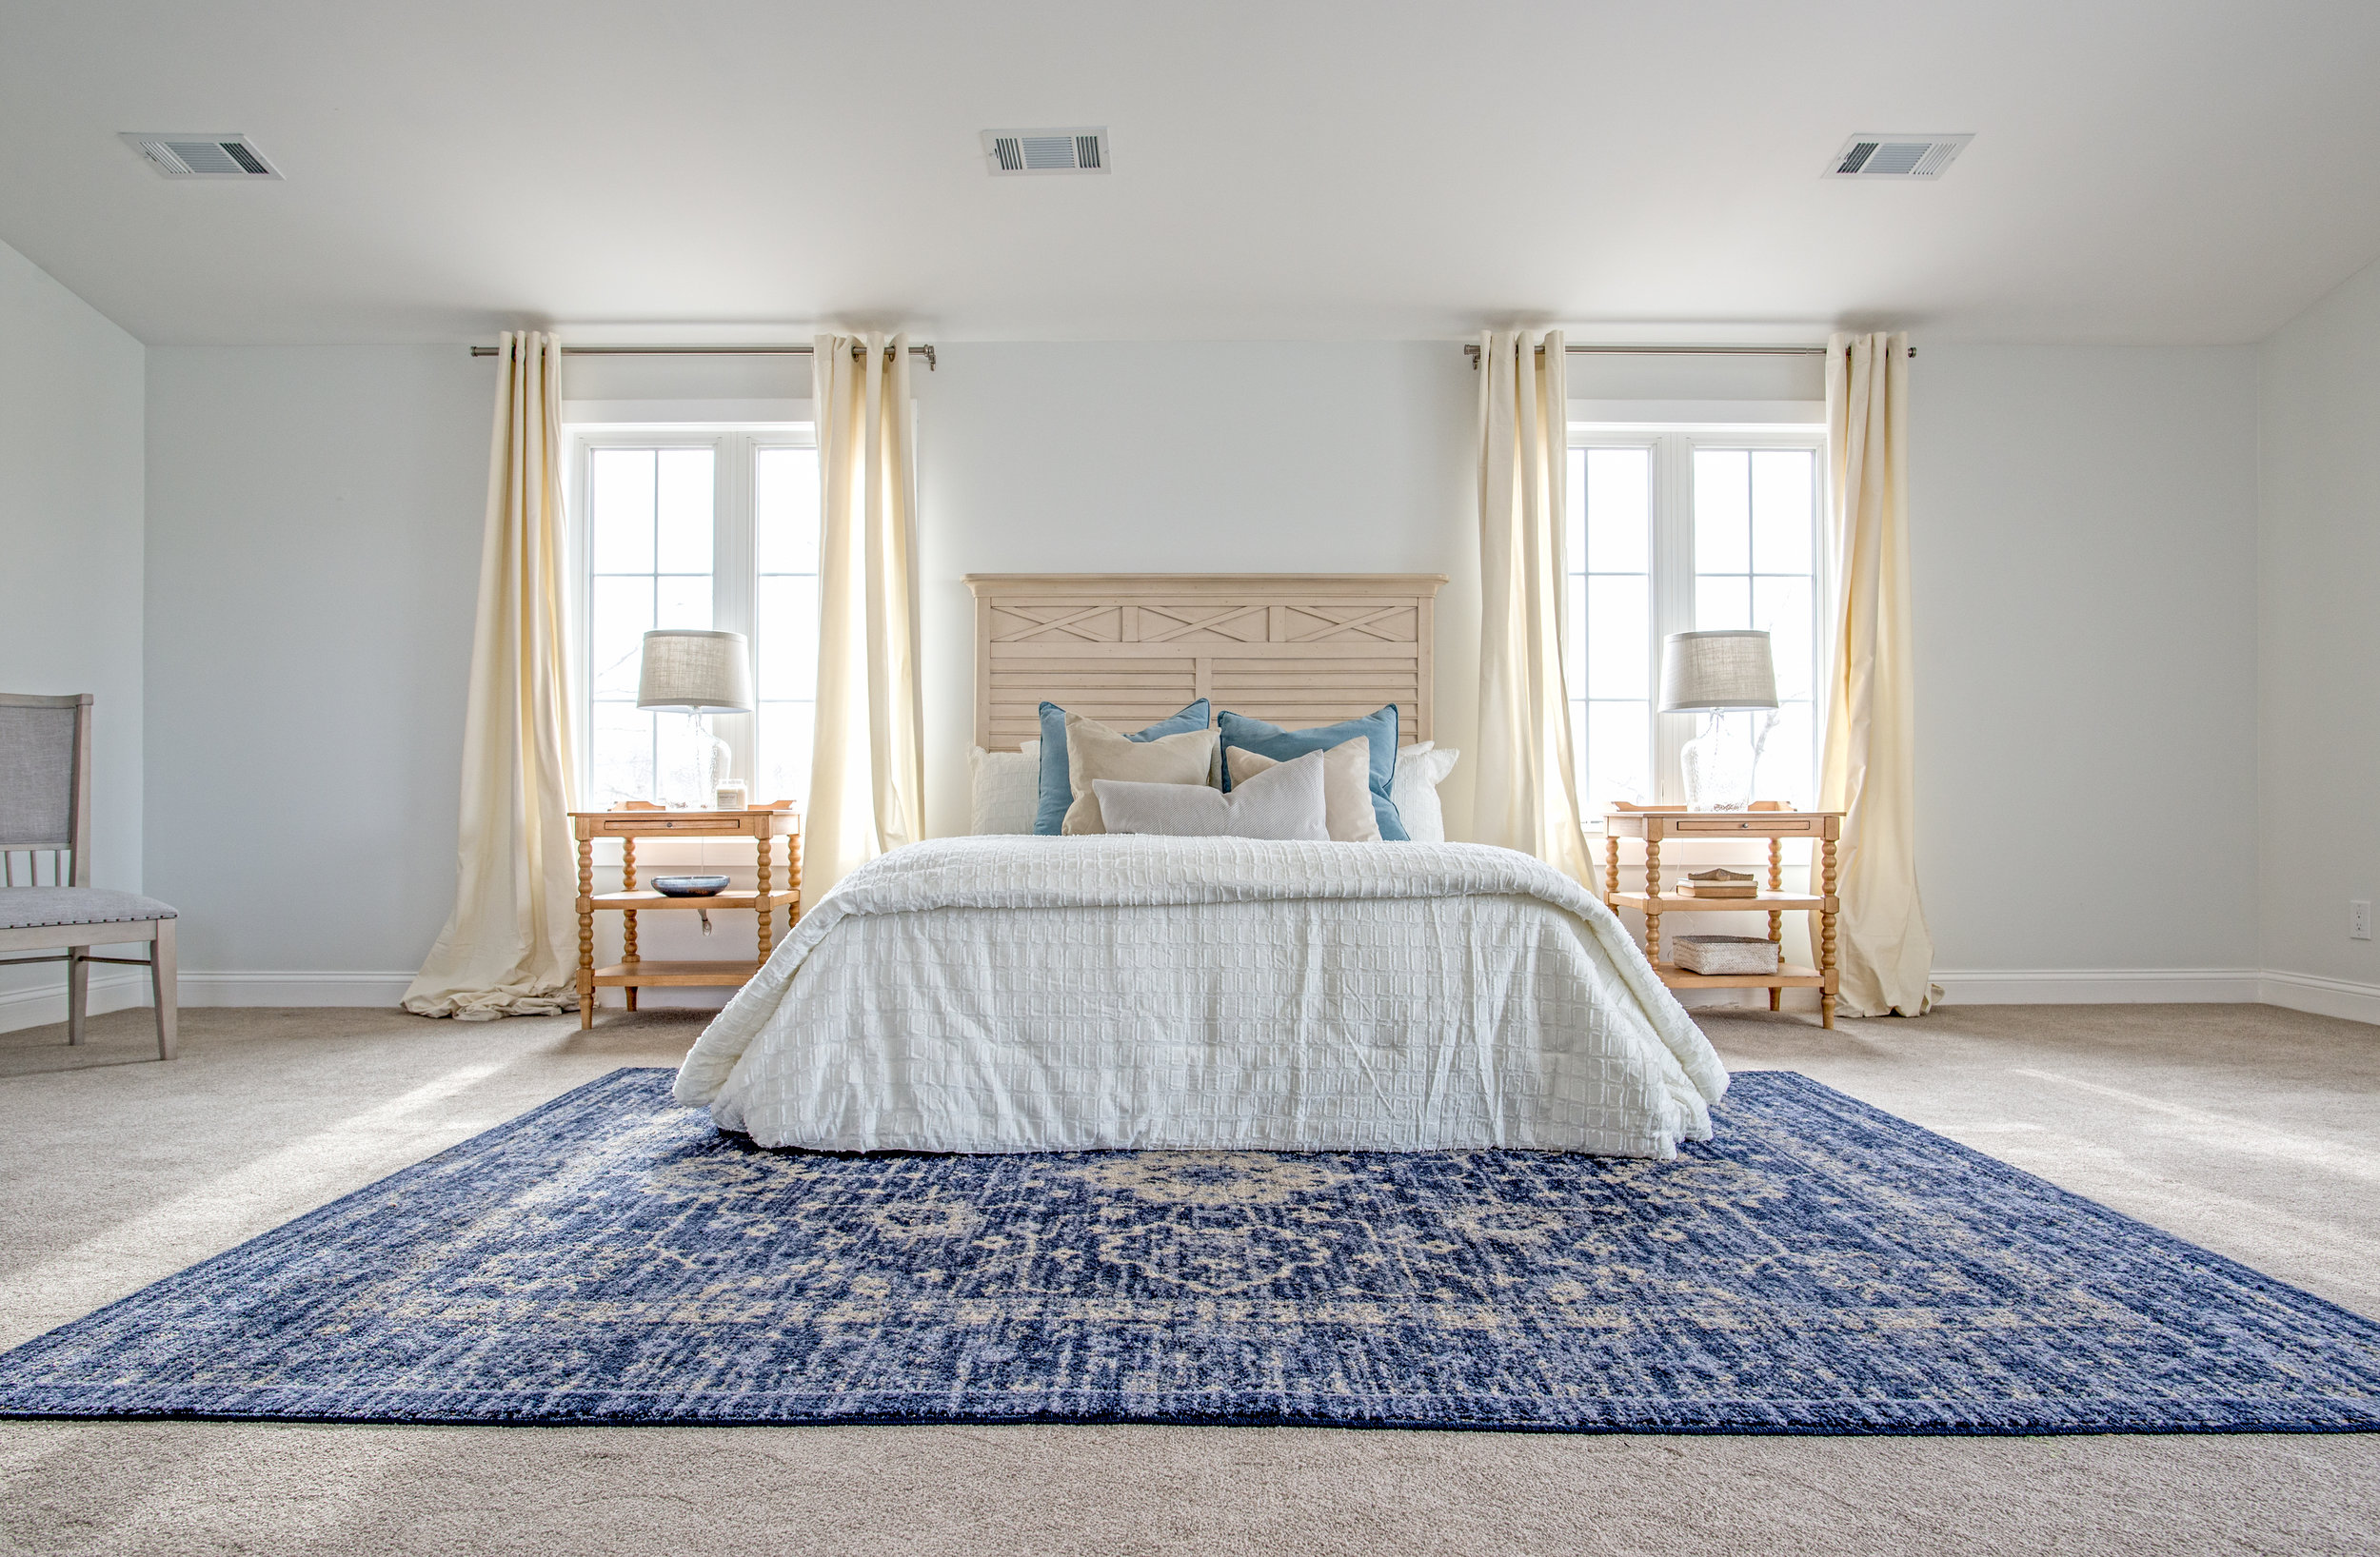 A simple staged bedroom at a recent shoot in Lake Lotawana for RootedKC Design & Realty.